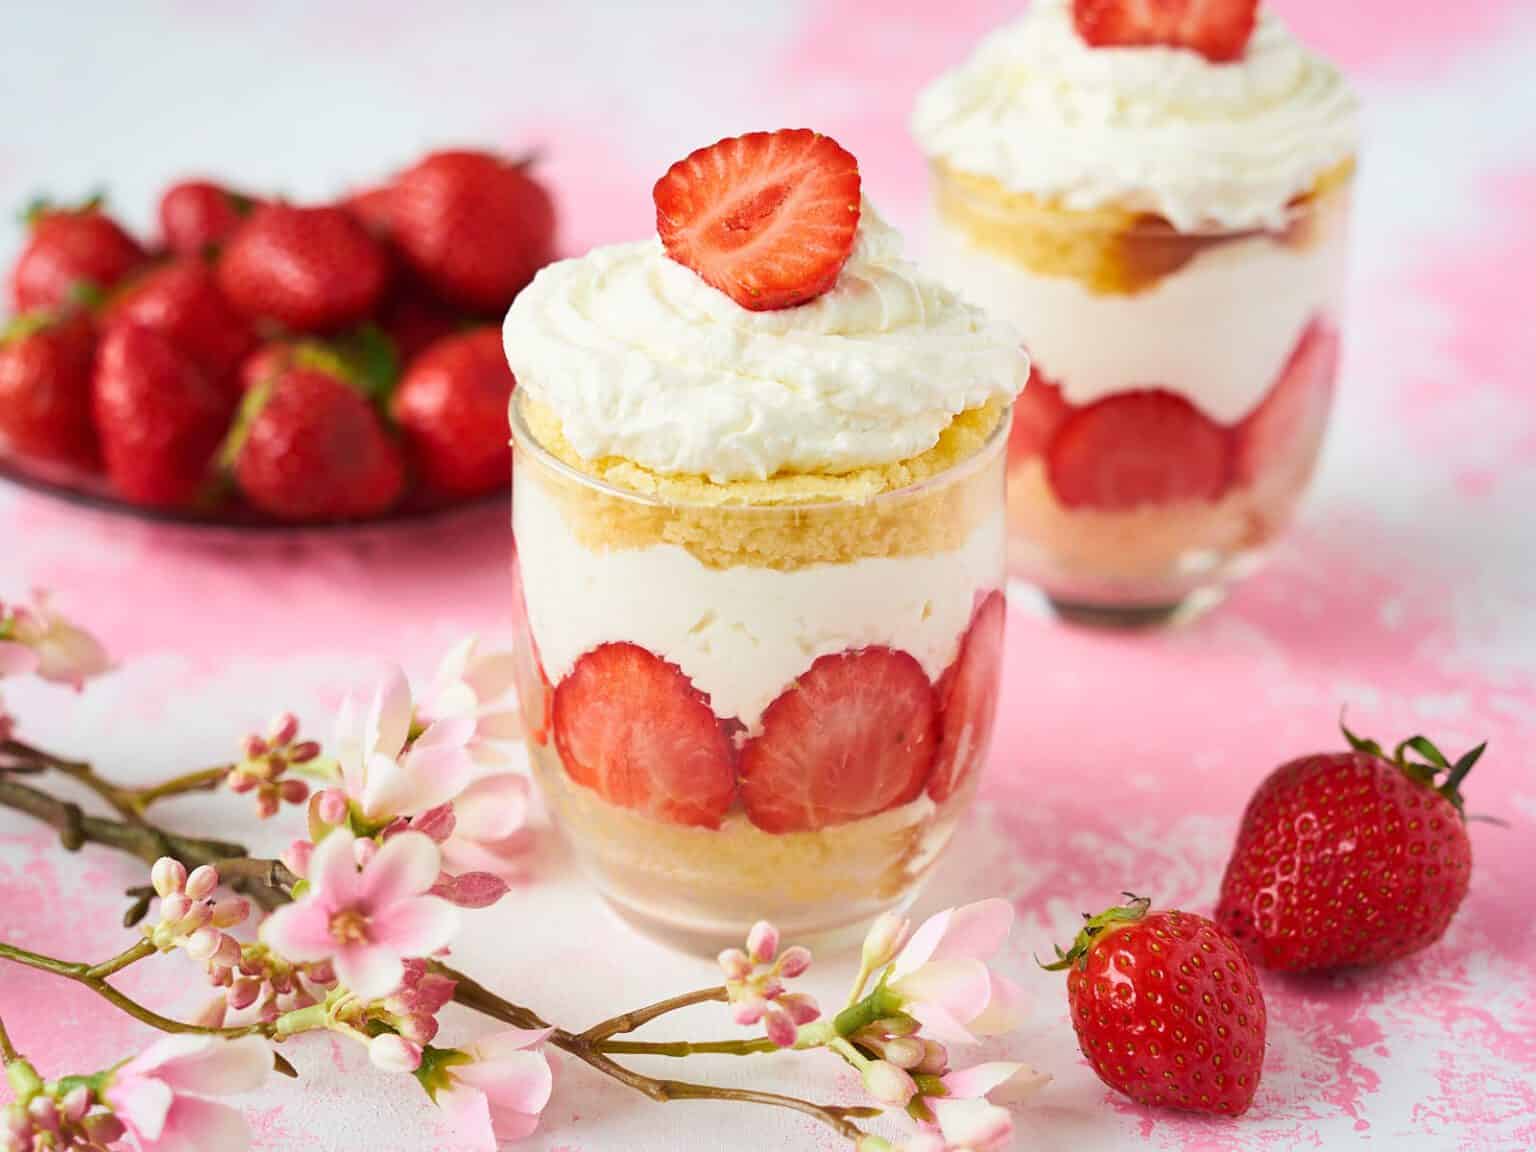 Strawberry trifle with whipped cream and strawberries.